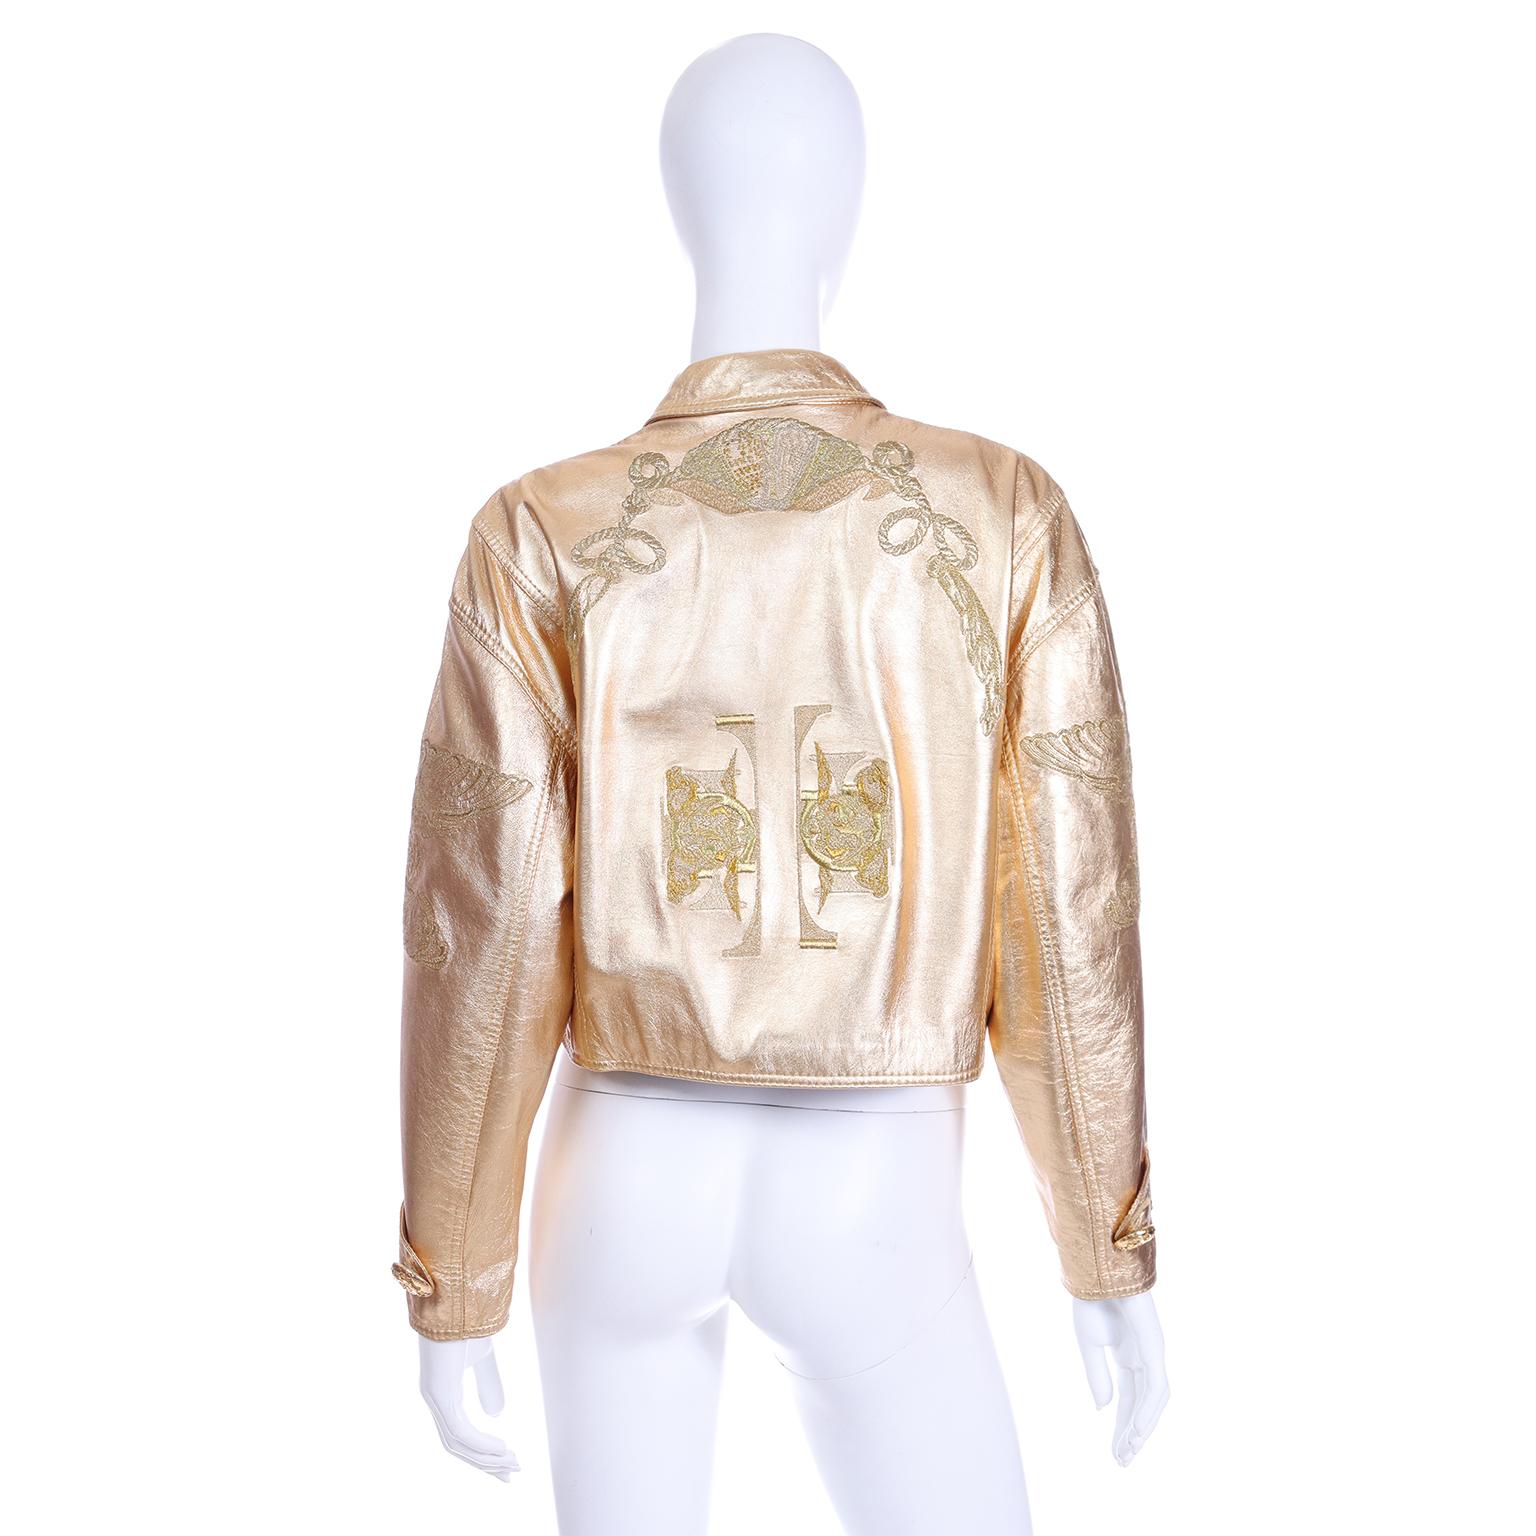 Women's Gianfranco Ferre S/S 1992 Runway Gold Leather Embroidered Ocean Theme Jacket For Sale